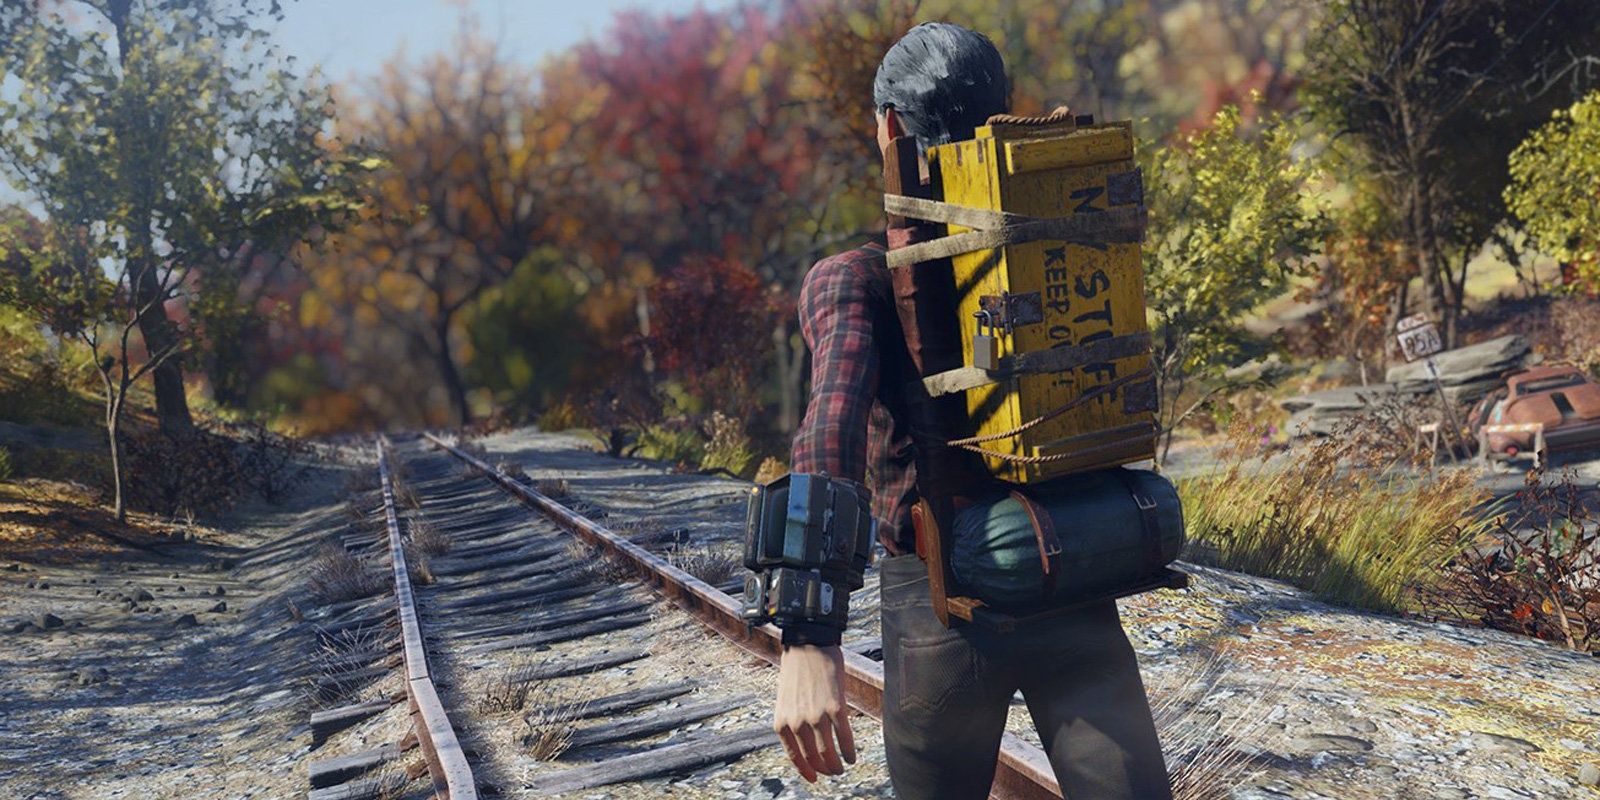 Fallout 76 Older Man Wearing Backpack Walking on Train Tracks in the Forest